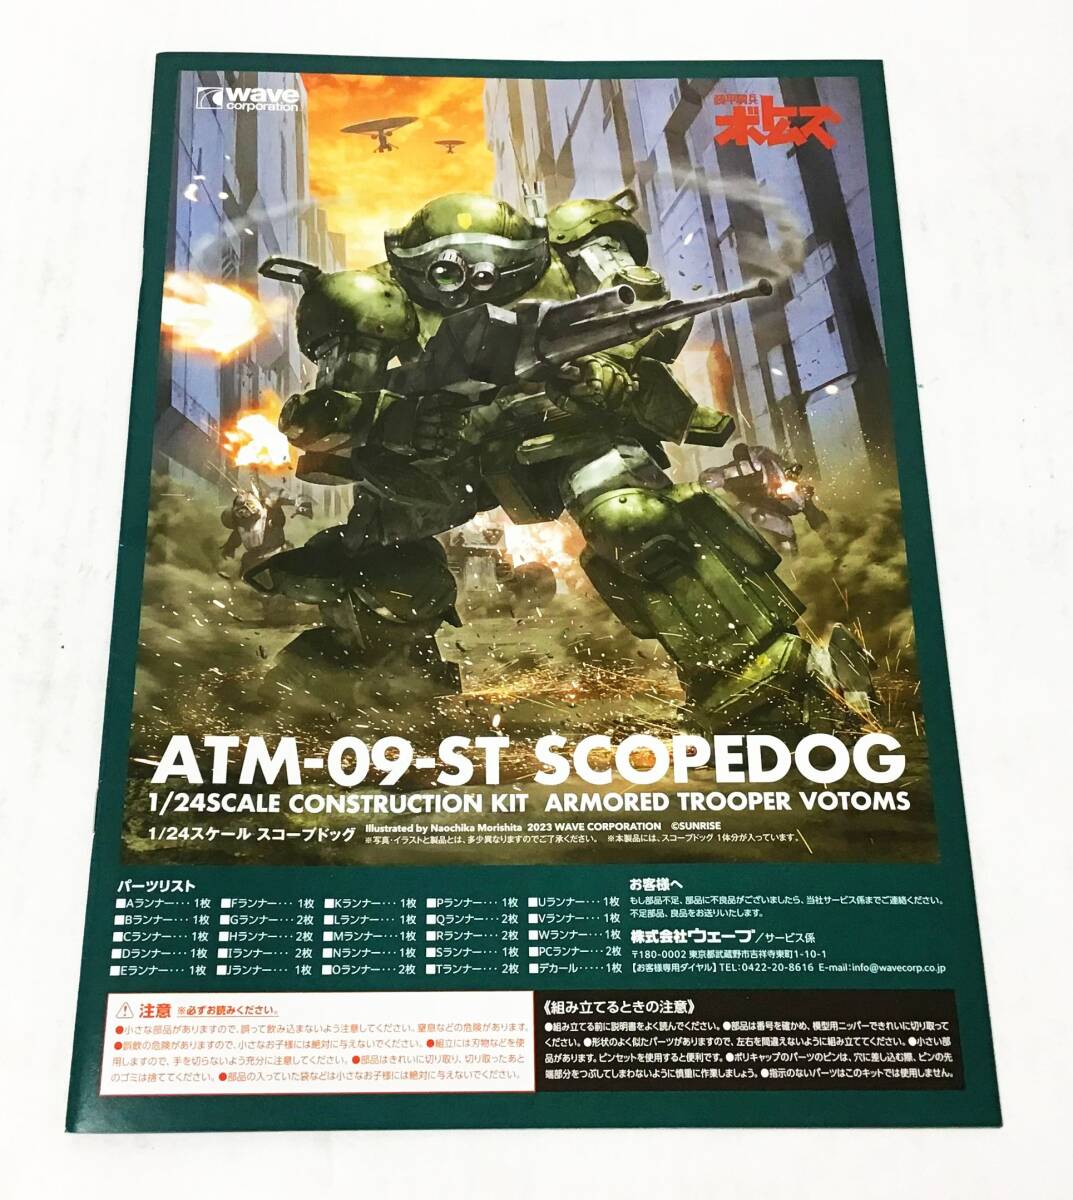  not yet constructed Armored Trooper Votoms wave 1/24 scope dog ATM-09-ST manual equipped plastic model Mobile Suit Gundam SCOPEDOG